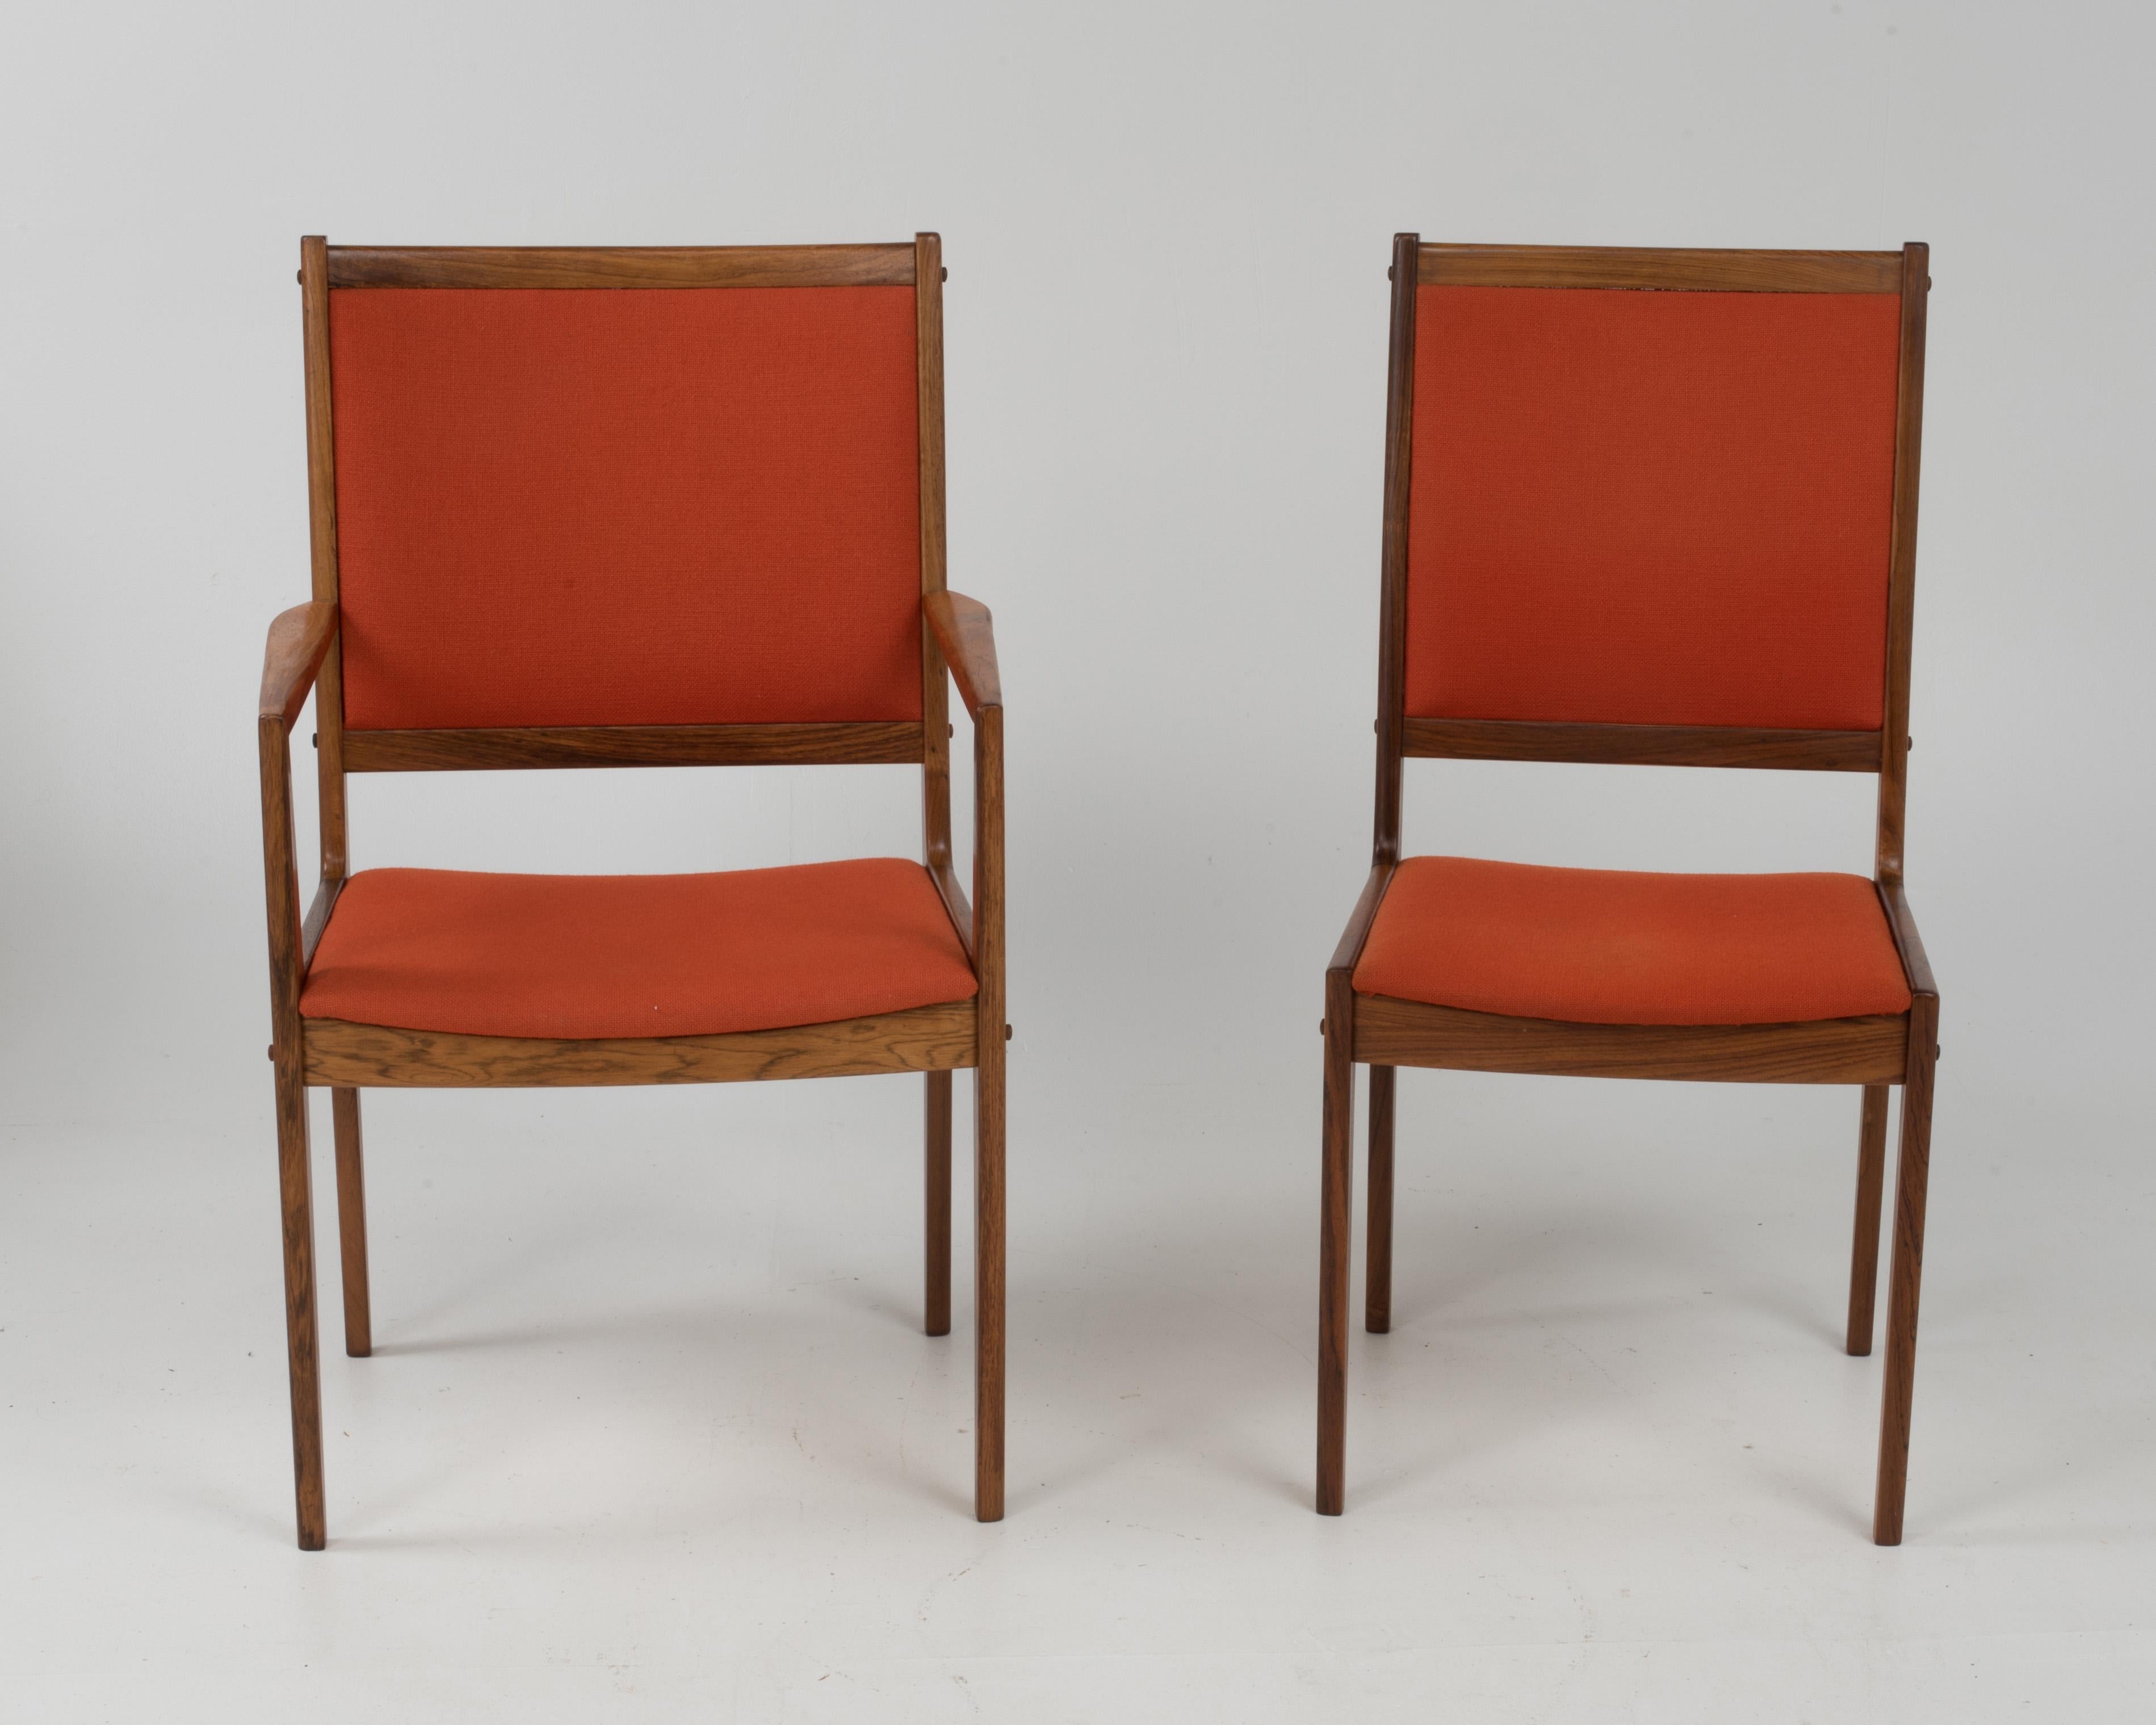 Nice clean set of 1970s era rosewood dining chairs by Bernhard Pedersen & Son upholstered in the original orange fabric. Marked 